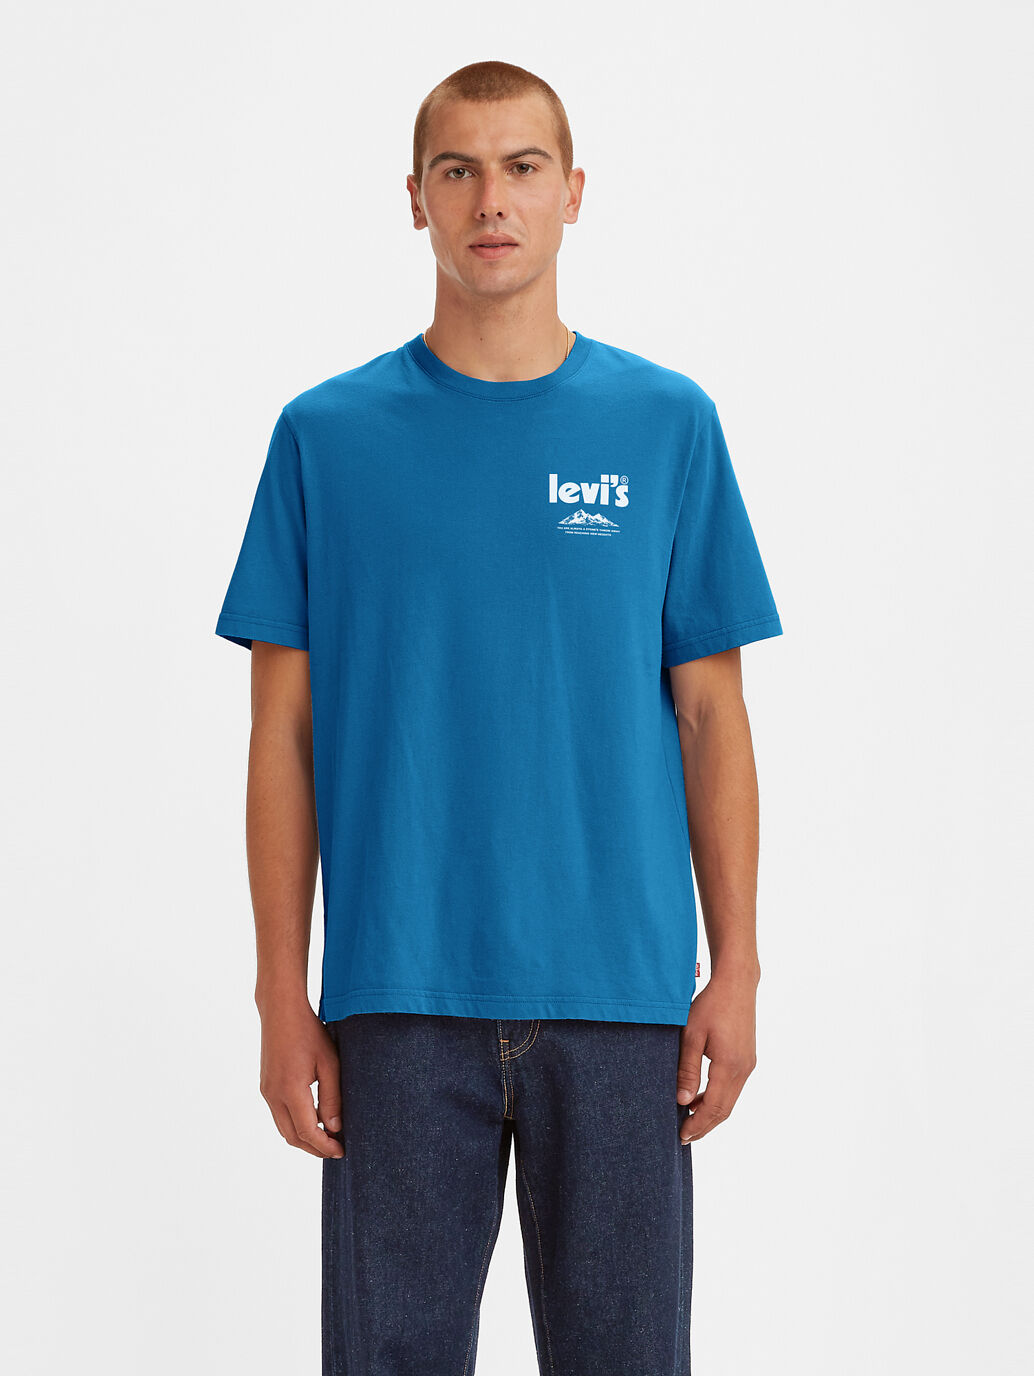 Relaxed Fit Short Sleeve Graphic Tee